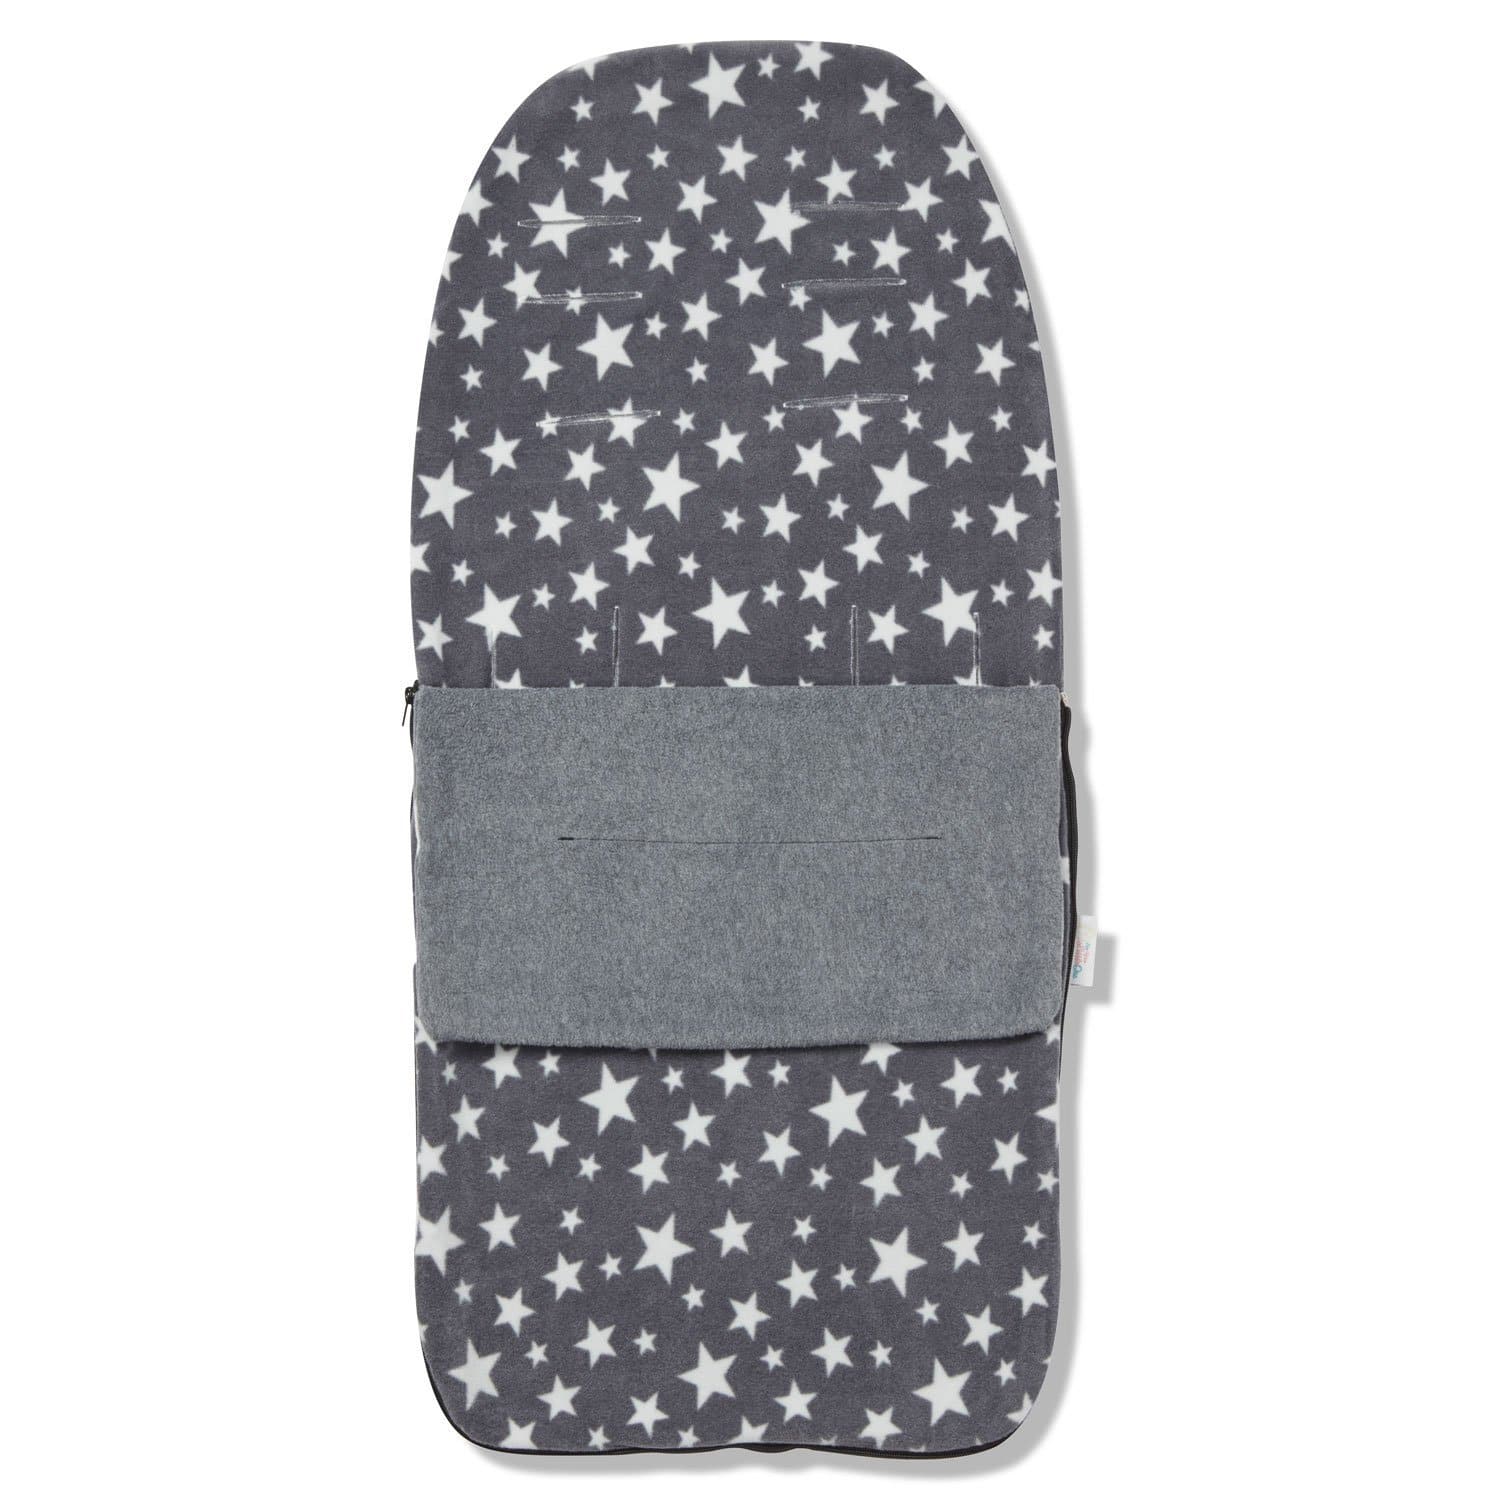 Snuggle Summer Footmuff Compatible with Cosatto - For Your Little One